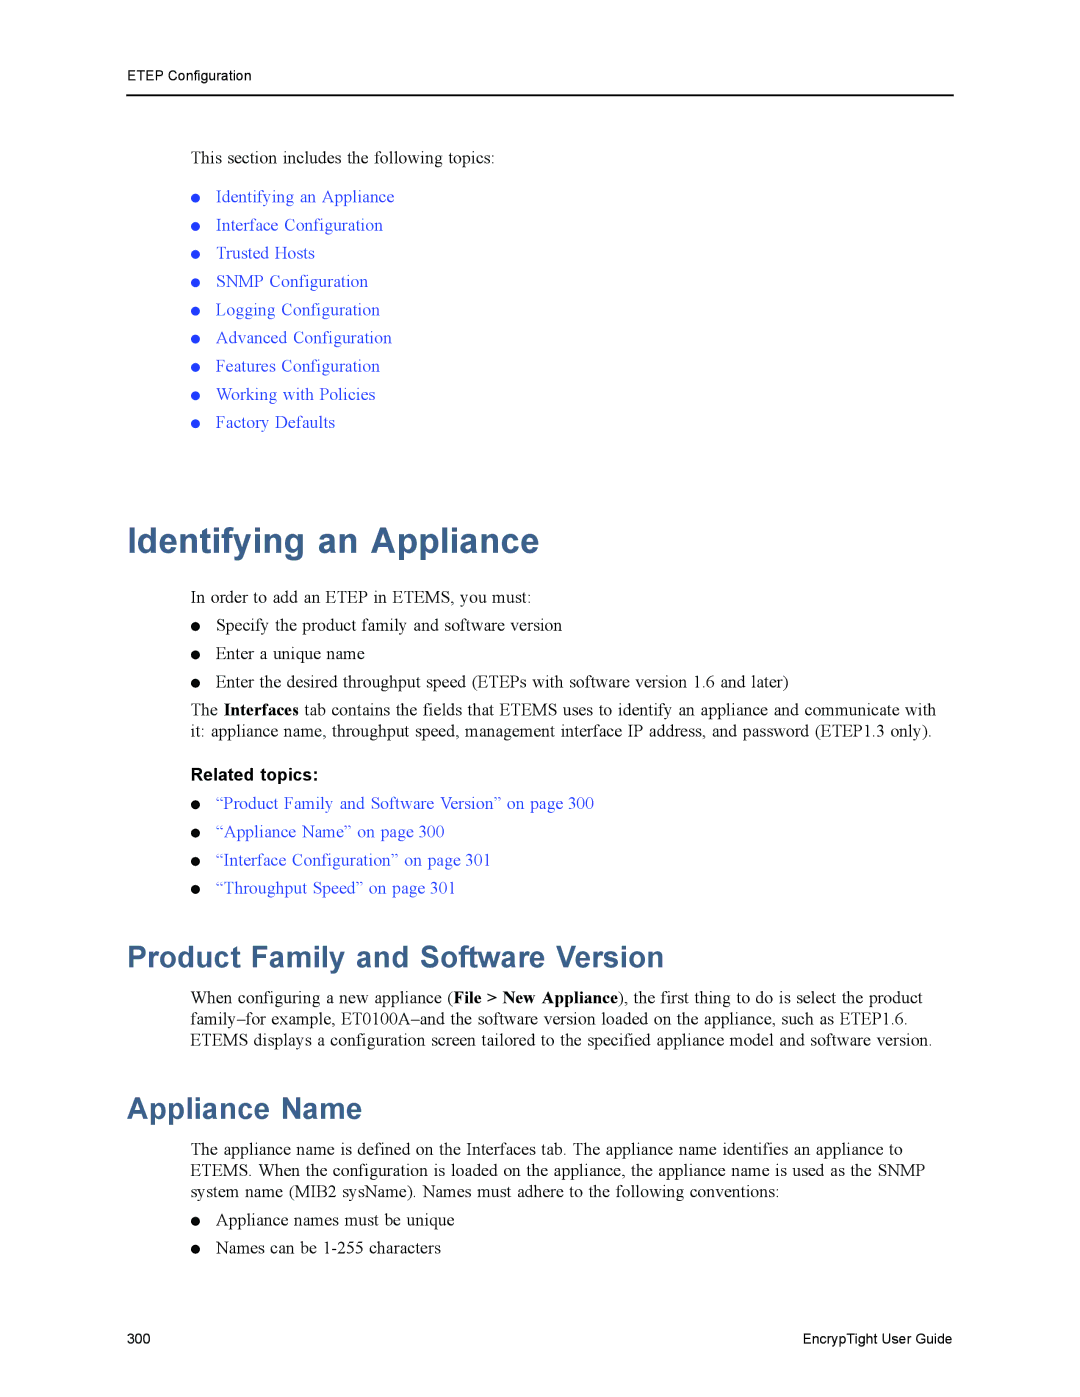 Black Box ET0100A, ET1000A, ET0010A manual Identifying an Appliance, Product Family and Software Version, Appliance Name 